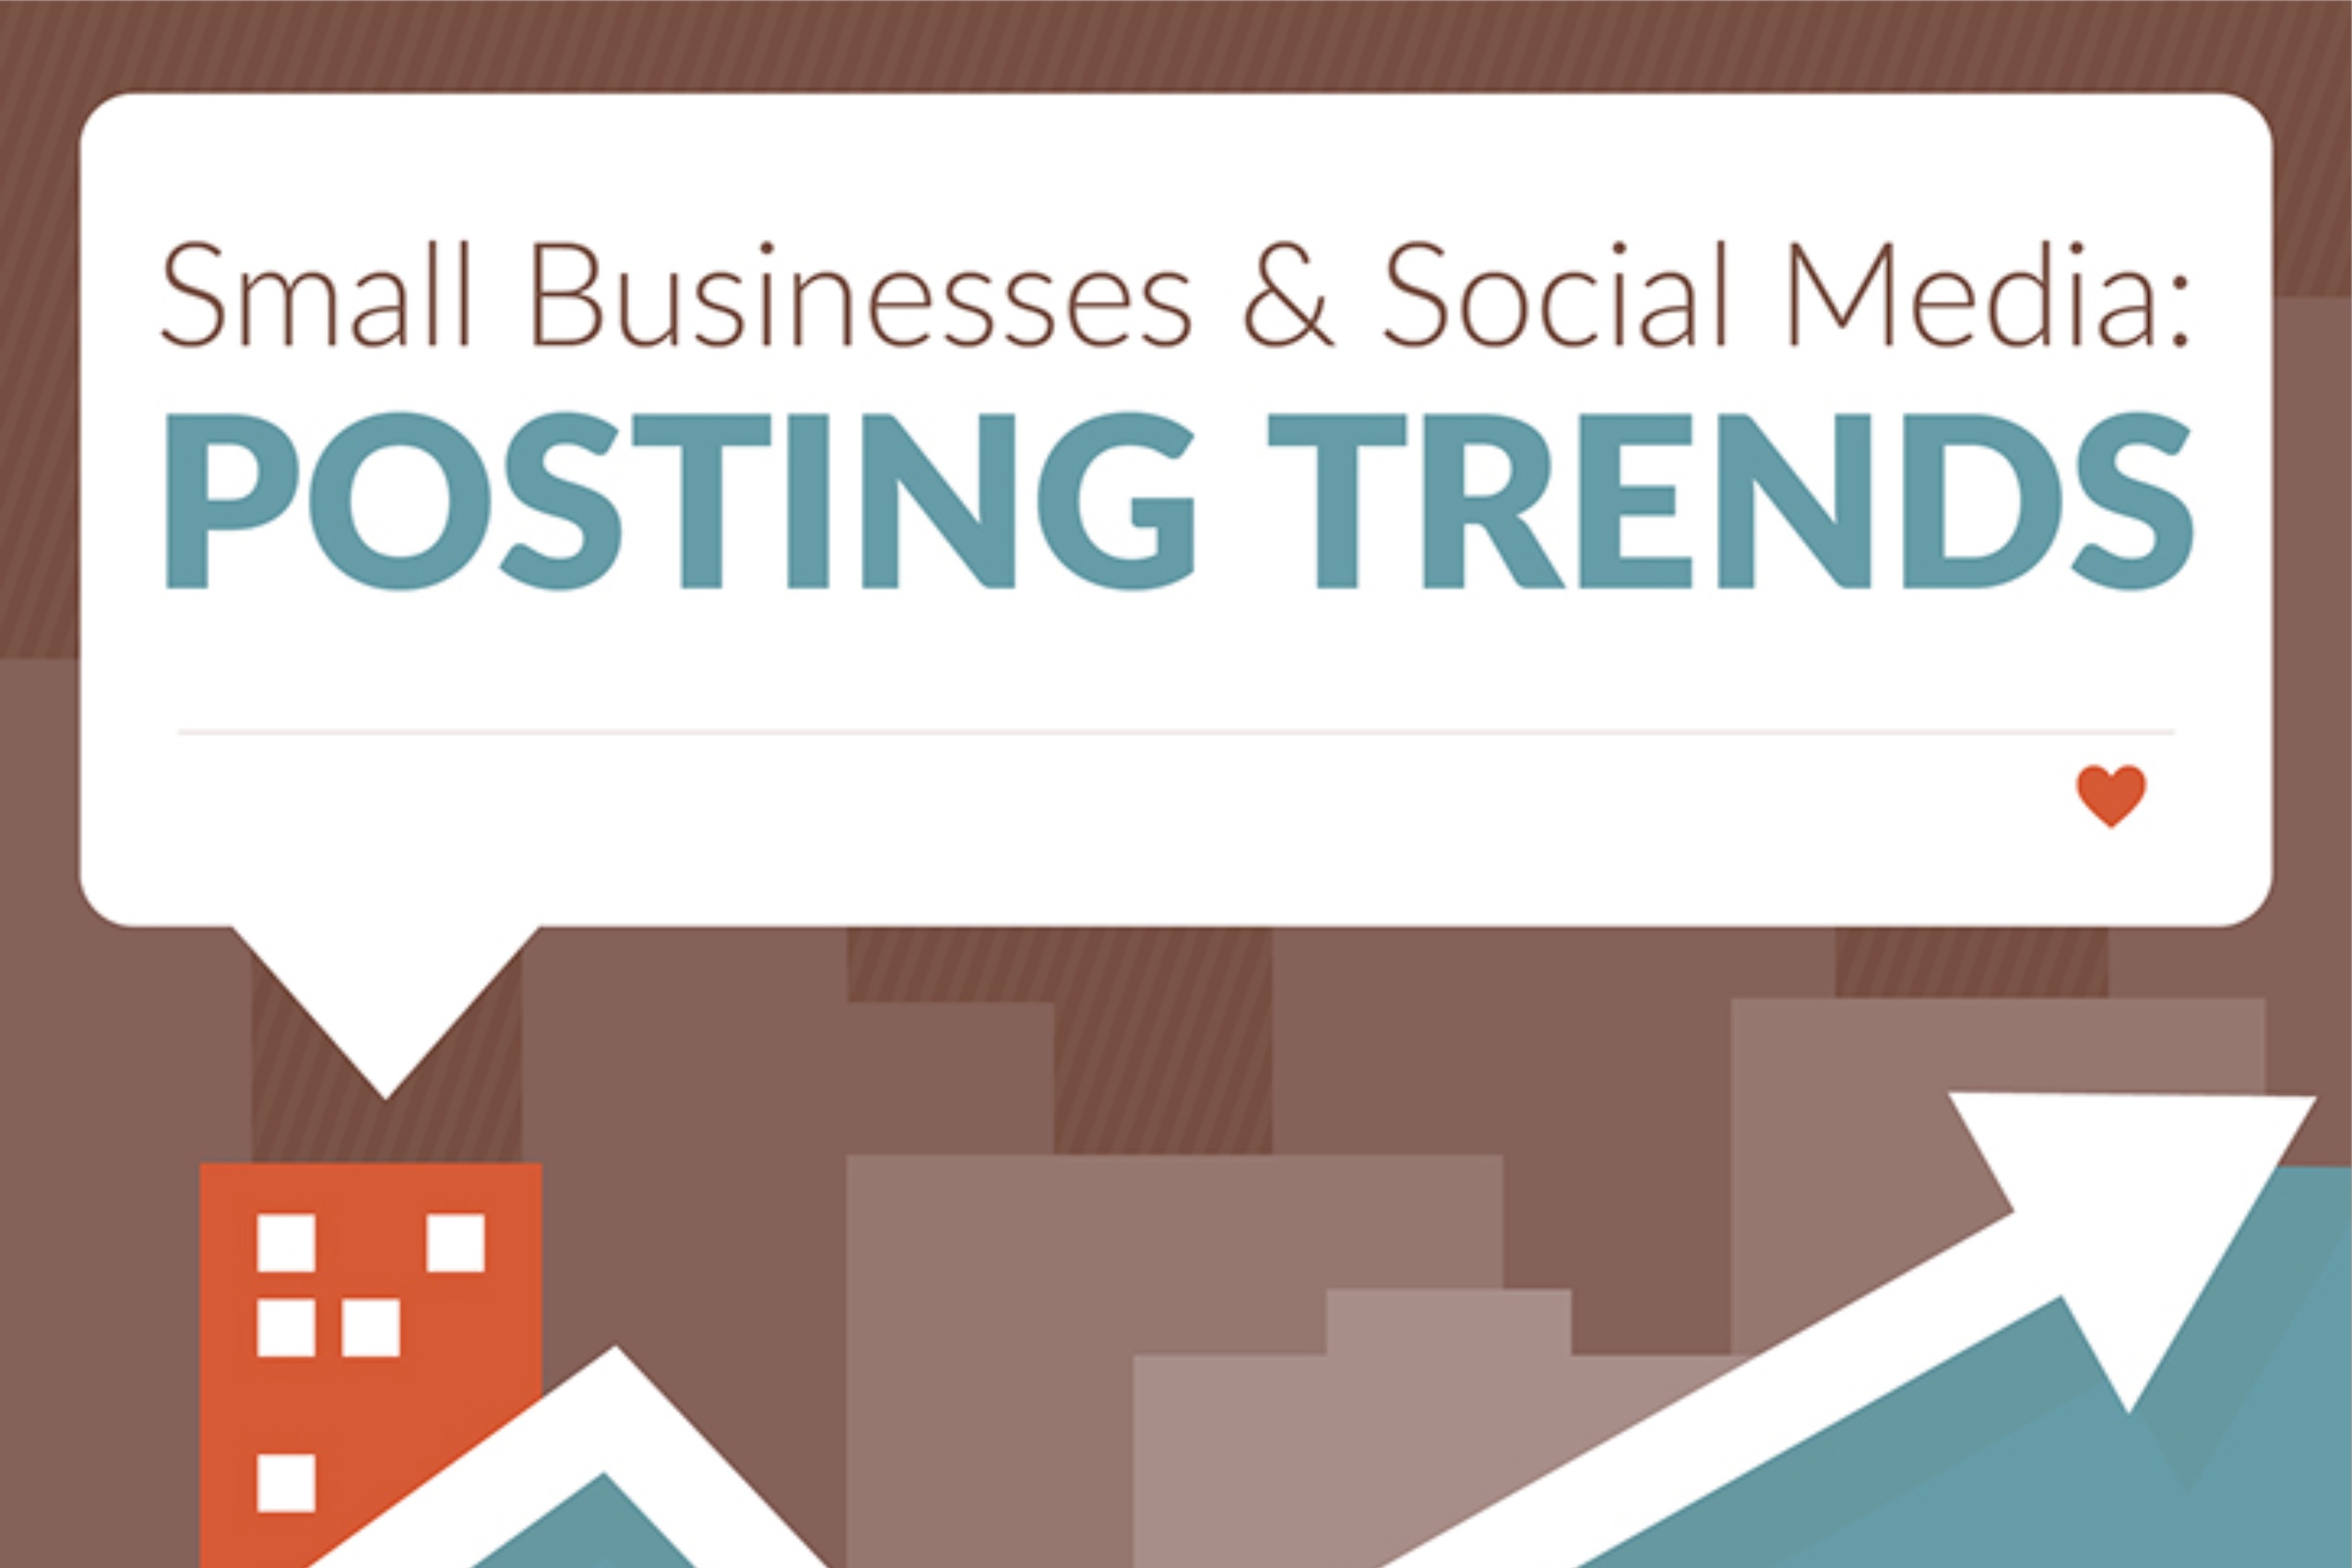 Small Business & Social Media: 2018 Posting Trends (infographic)